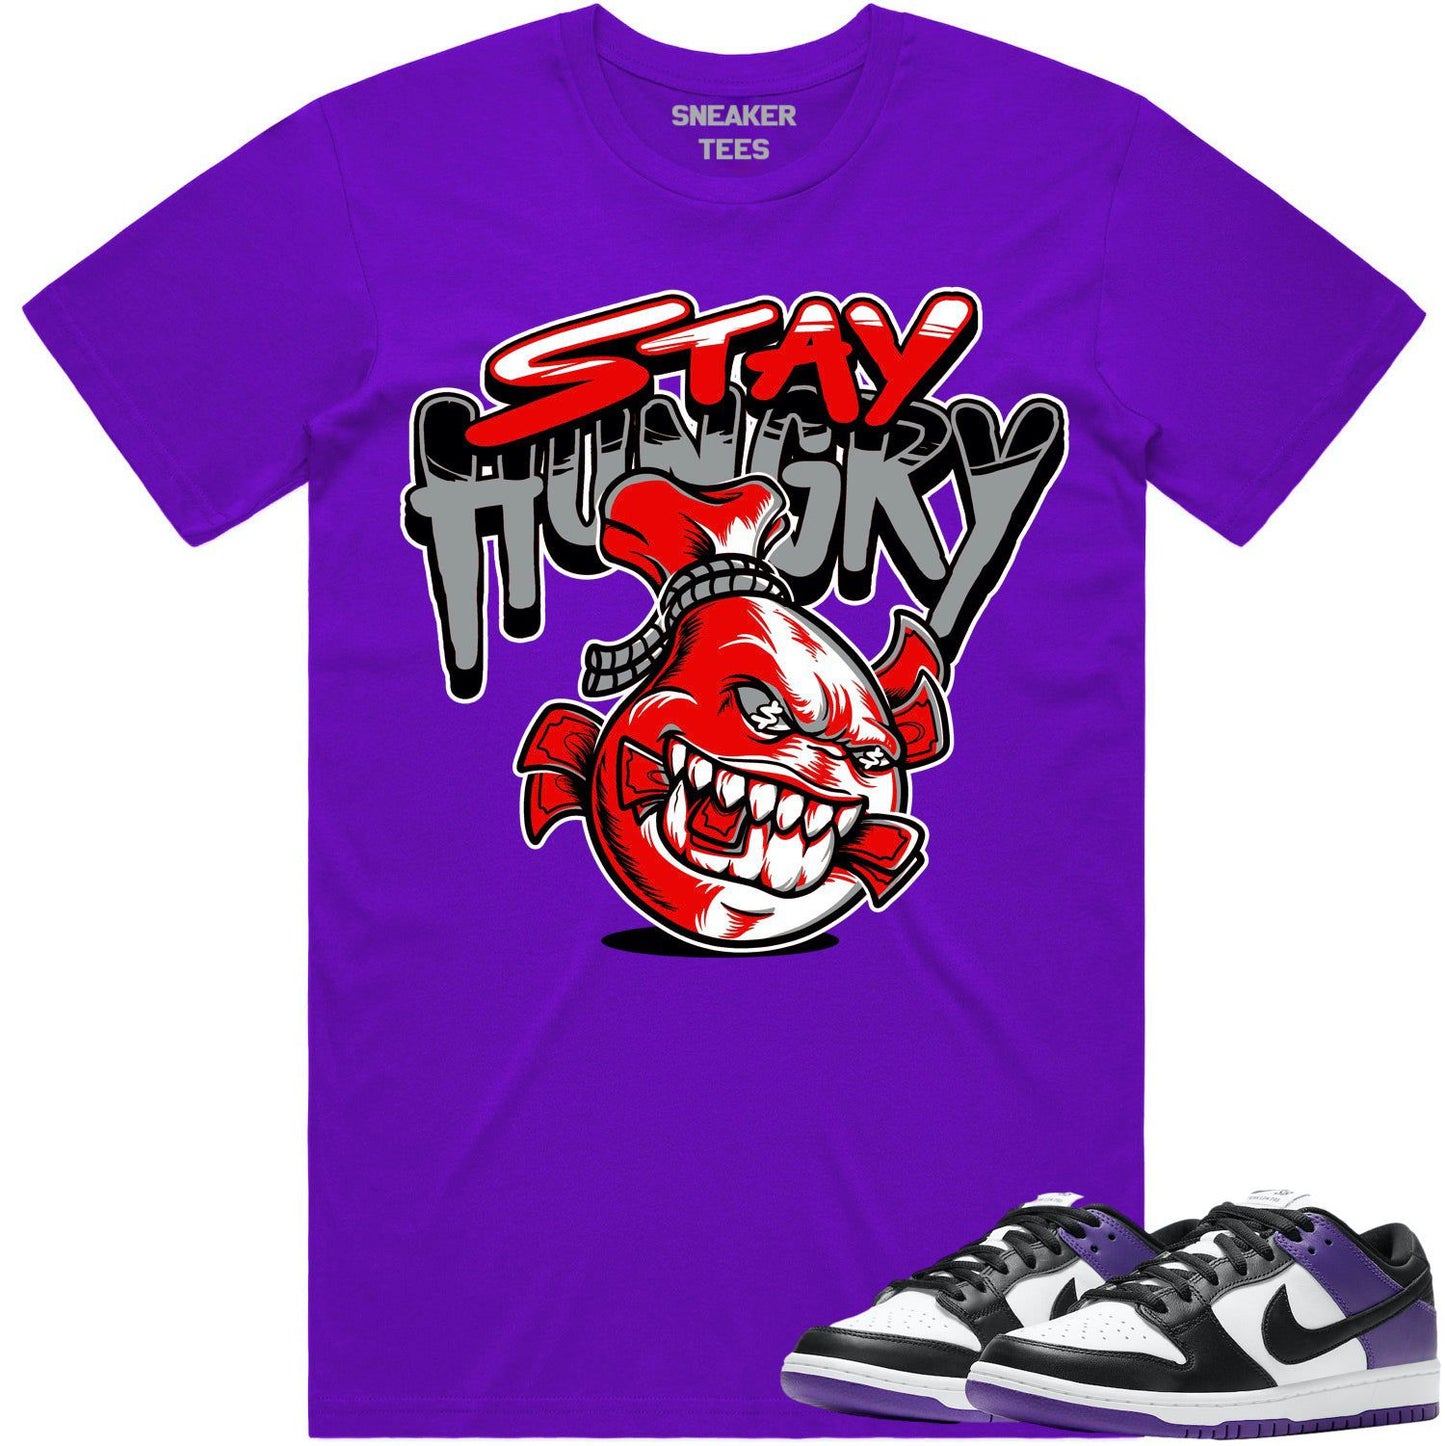 Court Purple Dunks Shirt - Dunks Sneaker Tees - Stay Hungry